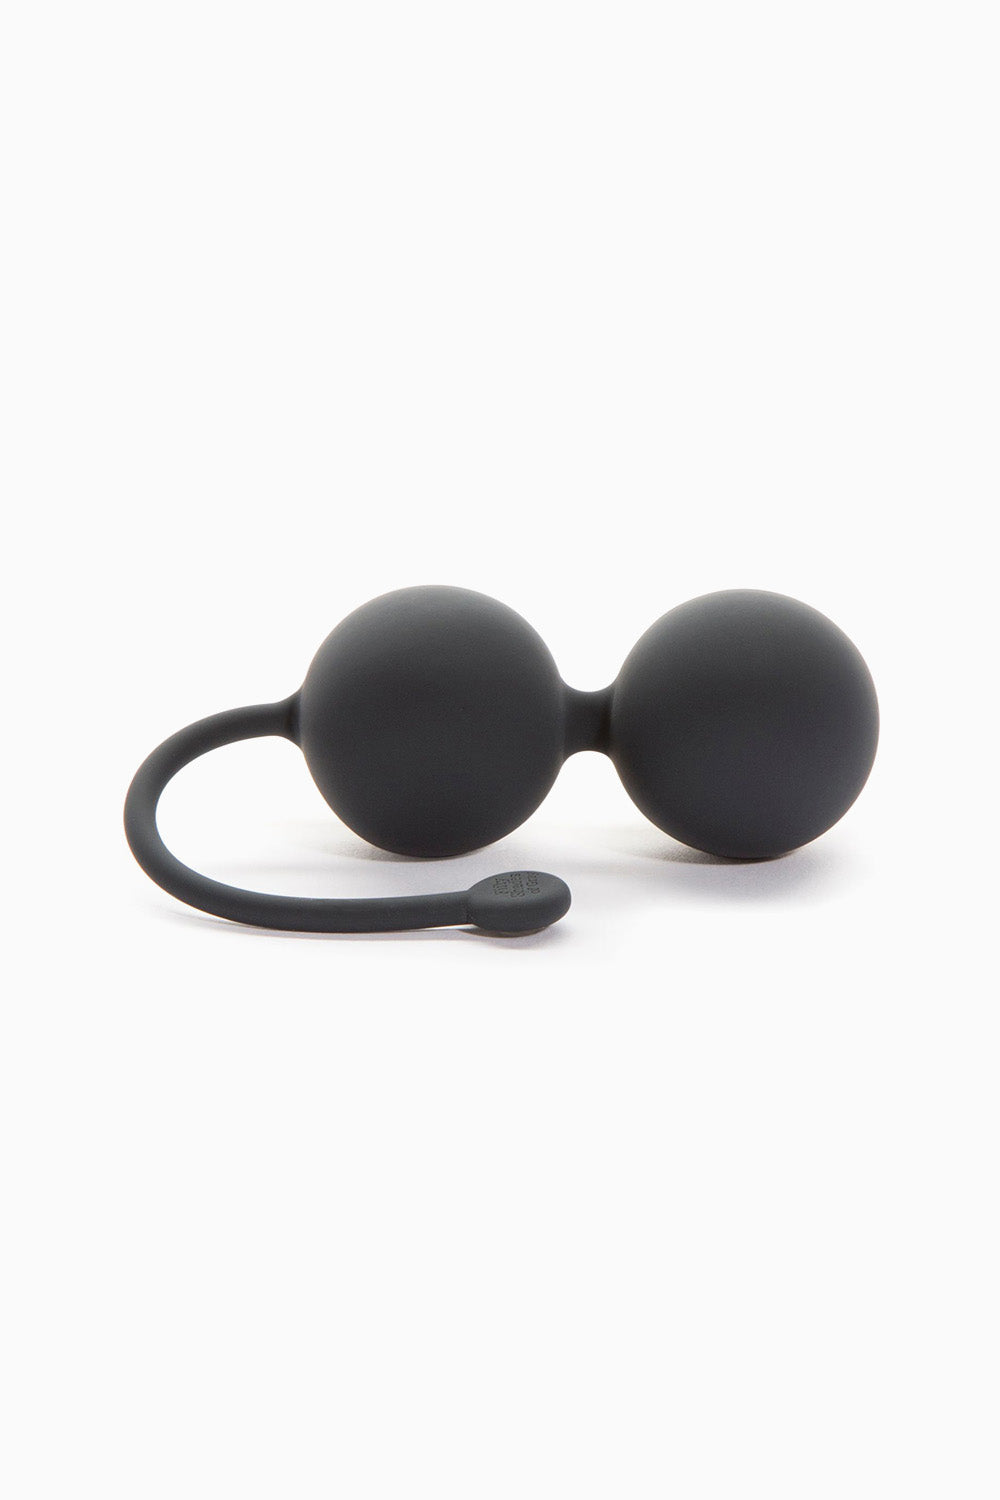 Fifty Shades of Grey Tighten and Tense Silicone Jiggle Balls